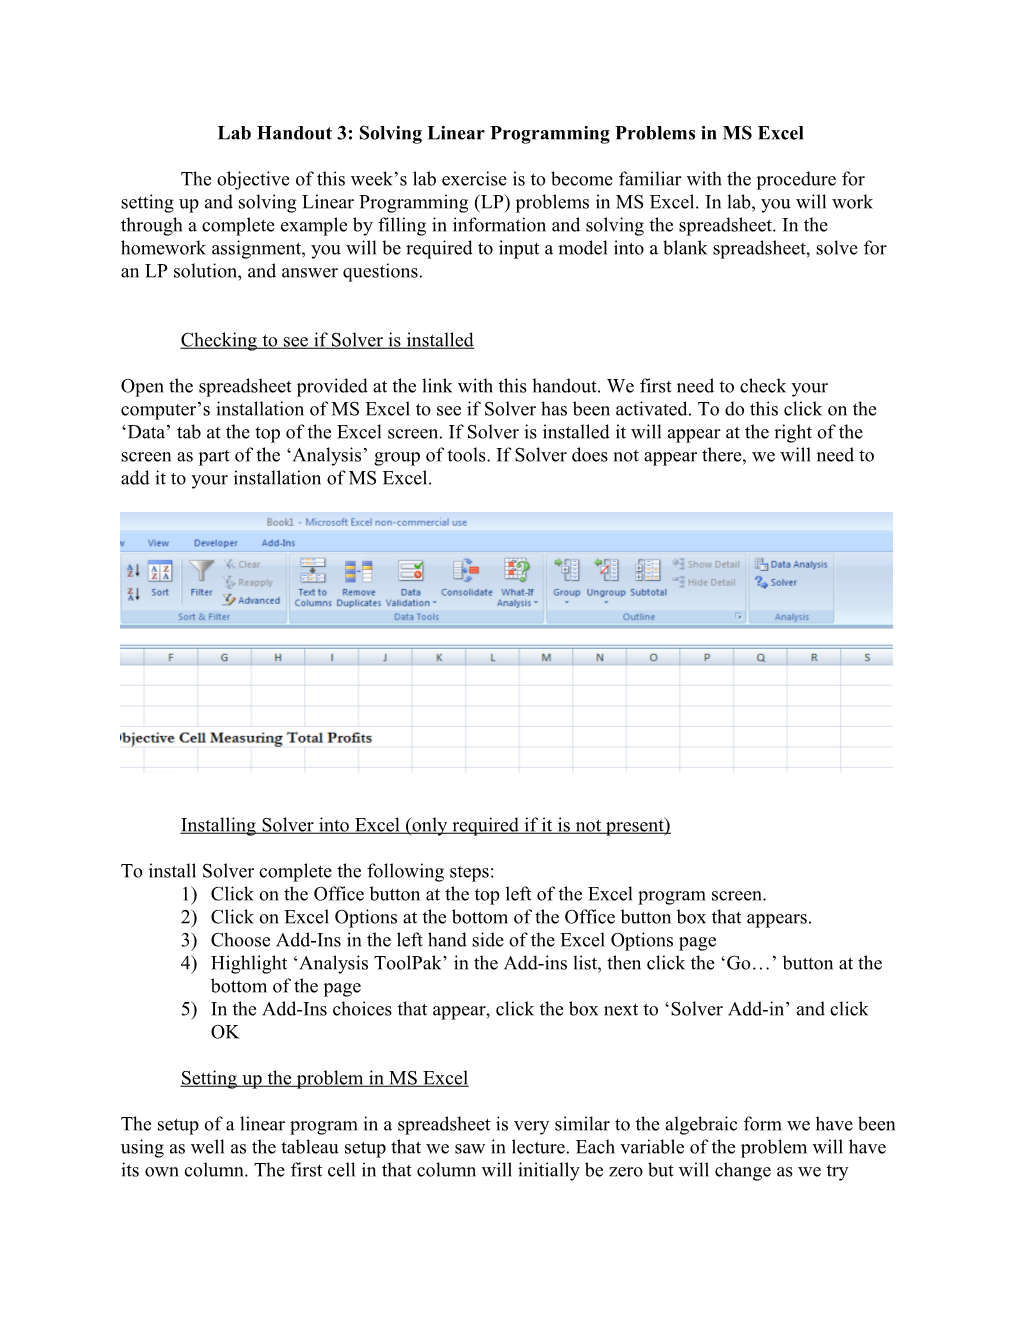 Lab Handout 3: Solving Linear Programming Problems in MS Excel